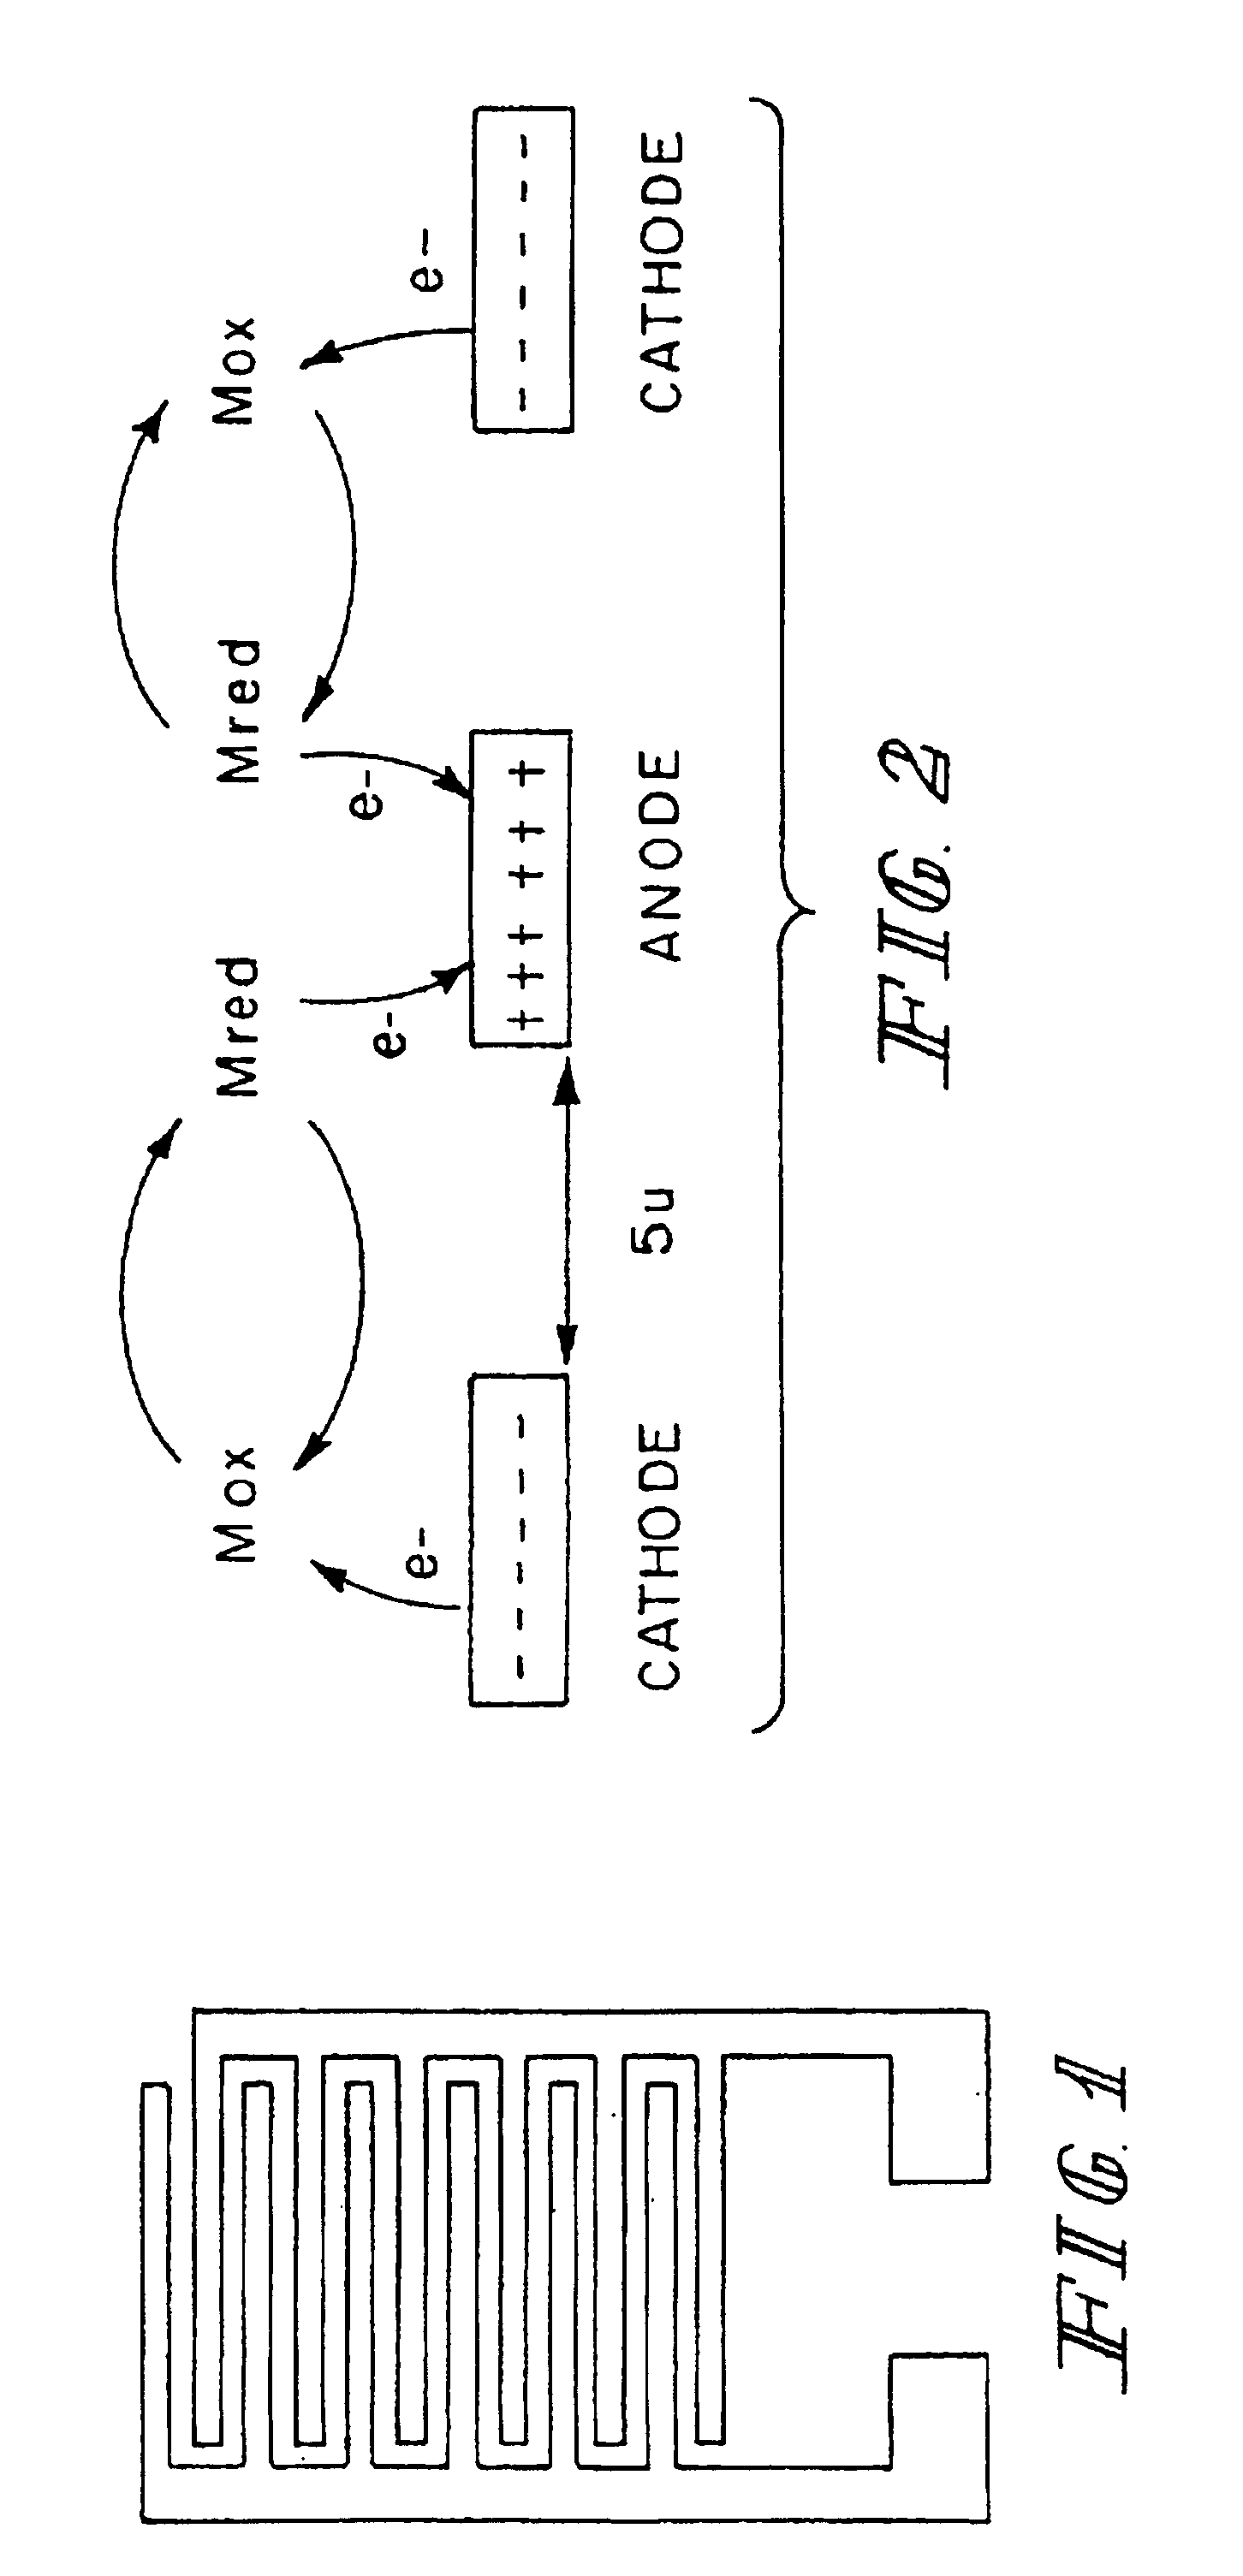 Method and device for electrochemical immunoassay of multiple analytes